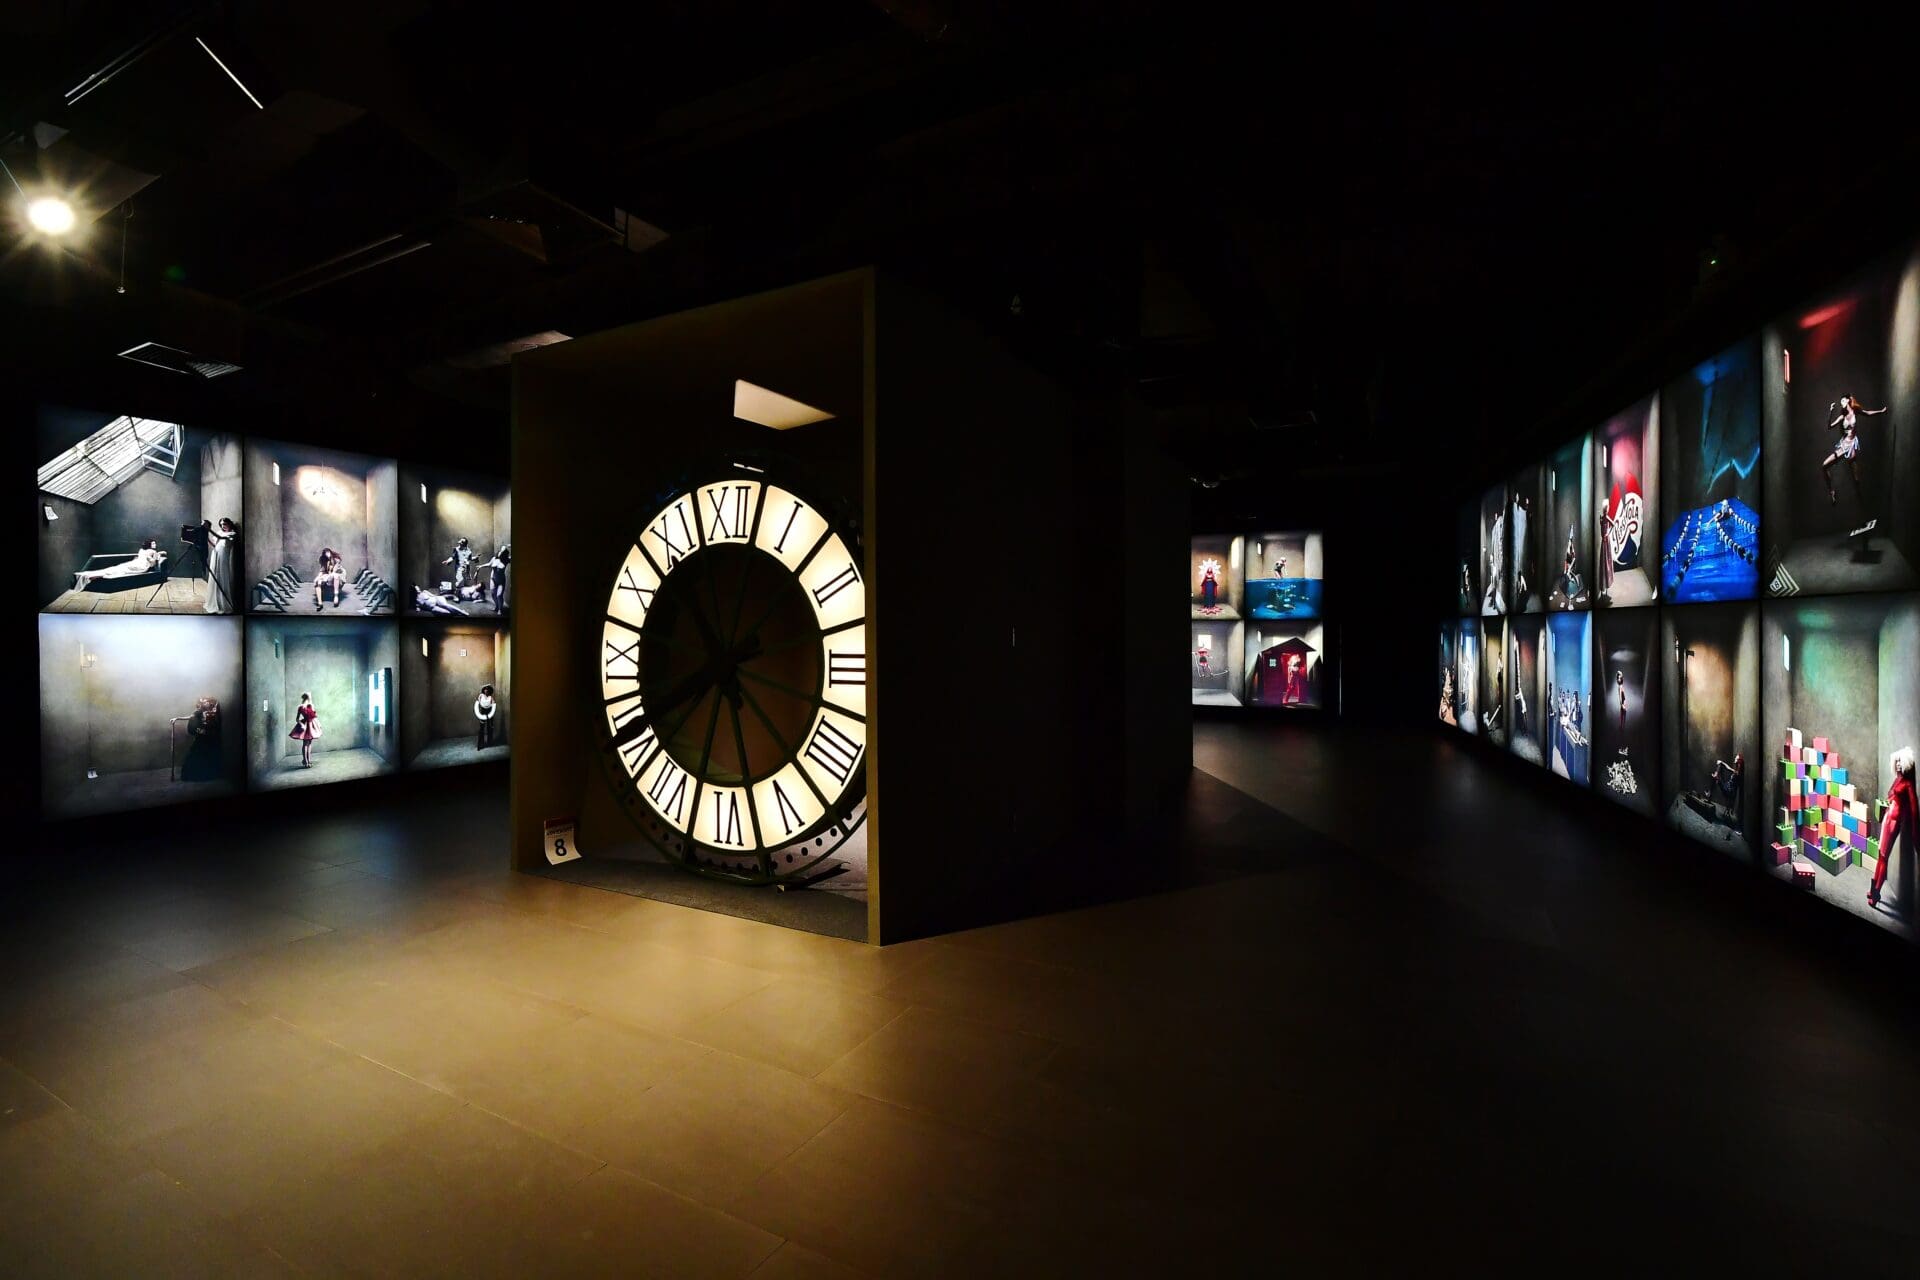 Best museums and galleries in Bangkok | A shadowy view of an art gallery inside River City Bangkok, with a luminous clock face installation in the centre of the room.